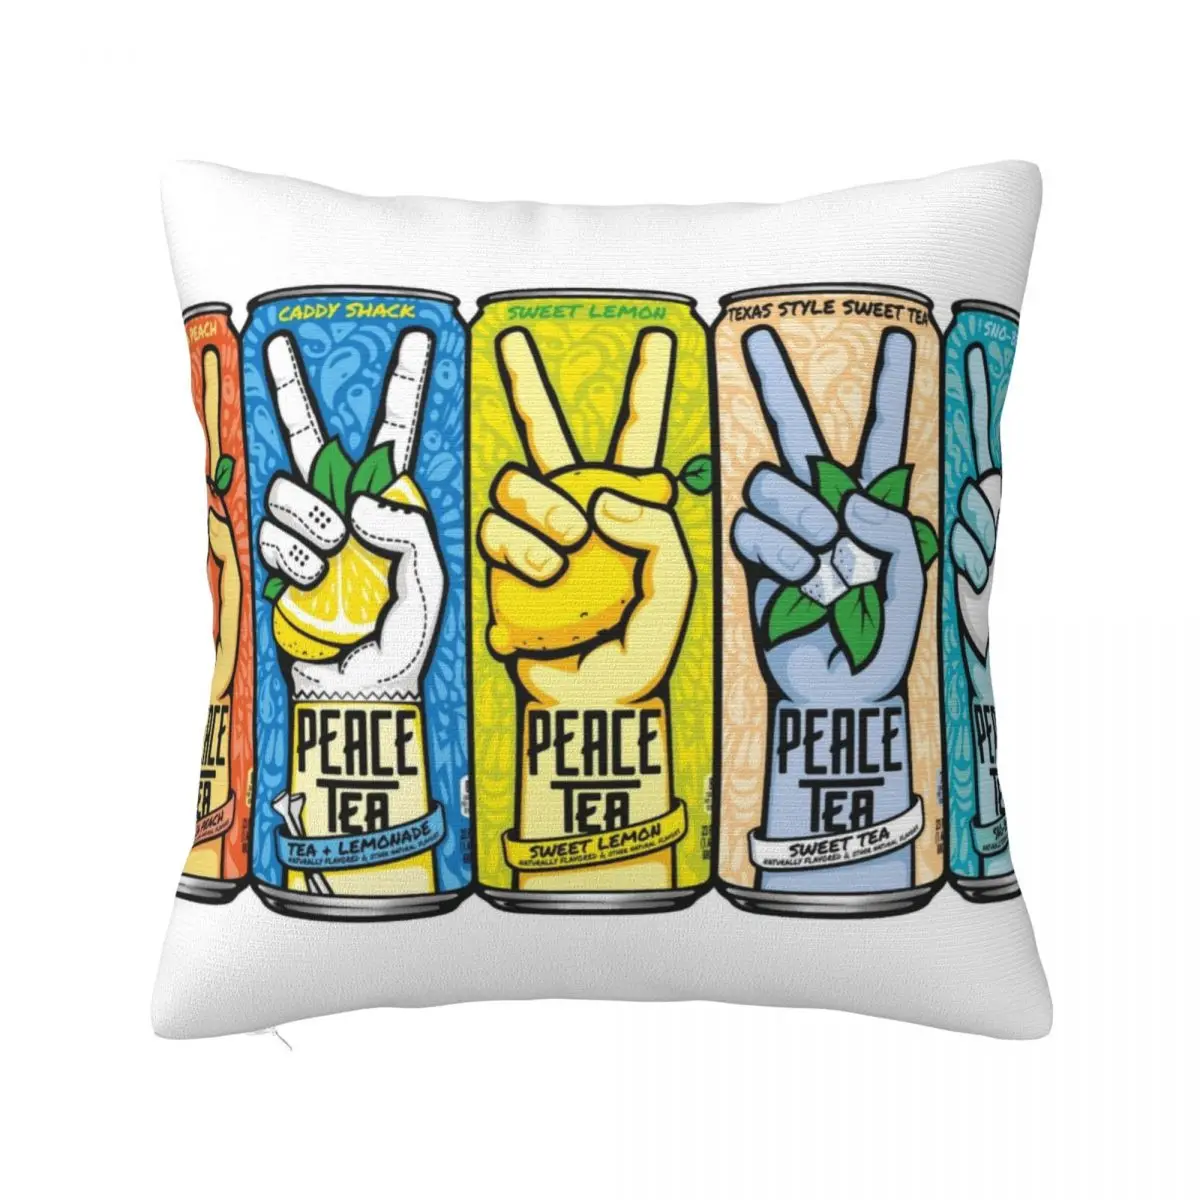 

peace tea Throw Pillow Cushion Covers For Living Room Marble Cushion Cover pillows decor home bed pillows